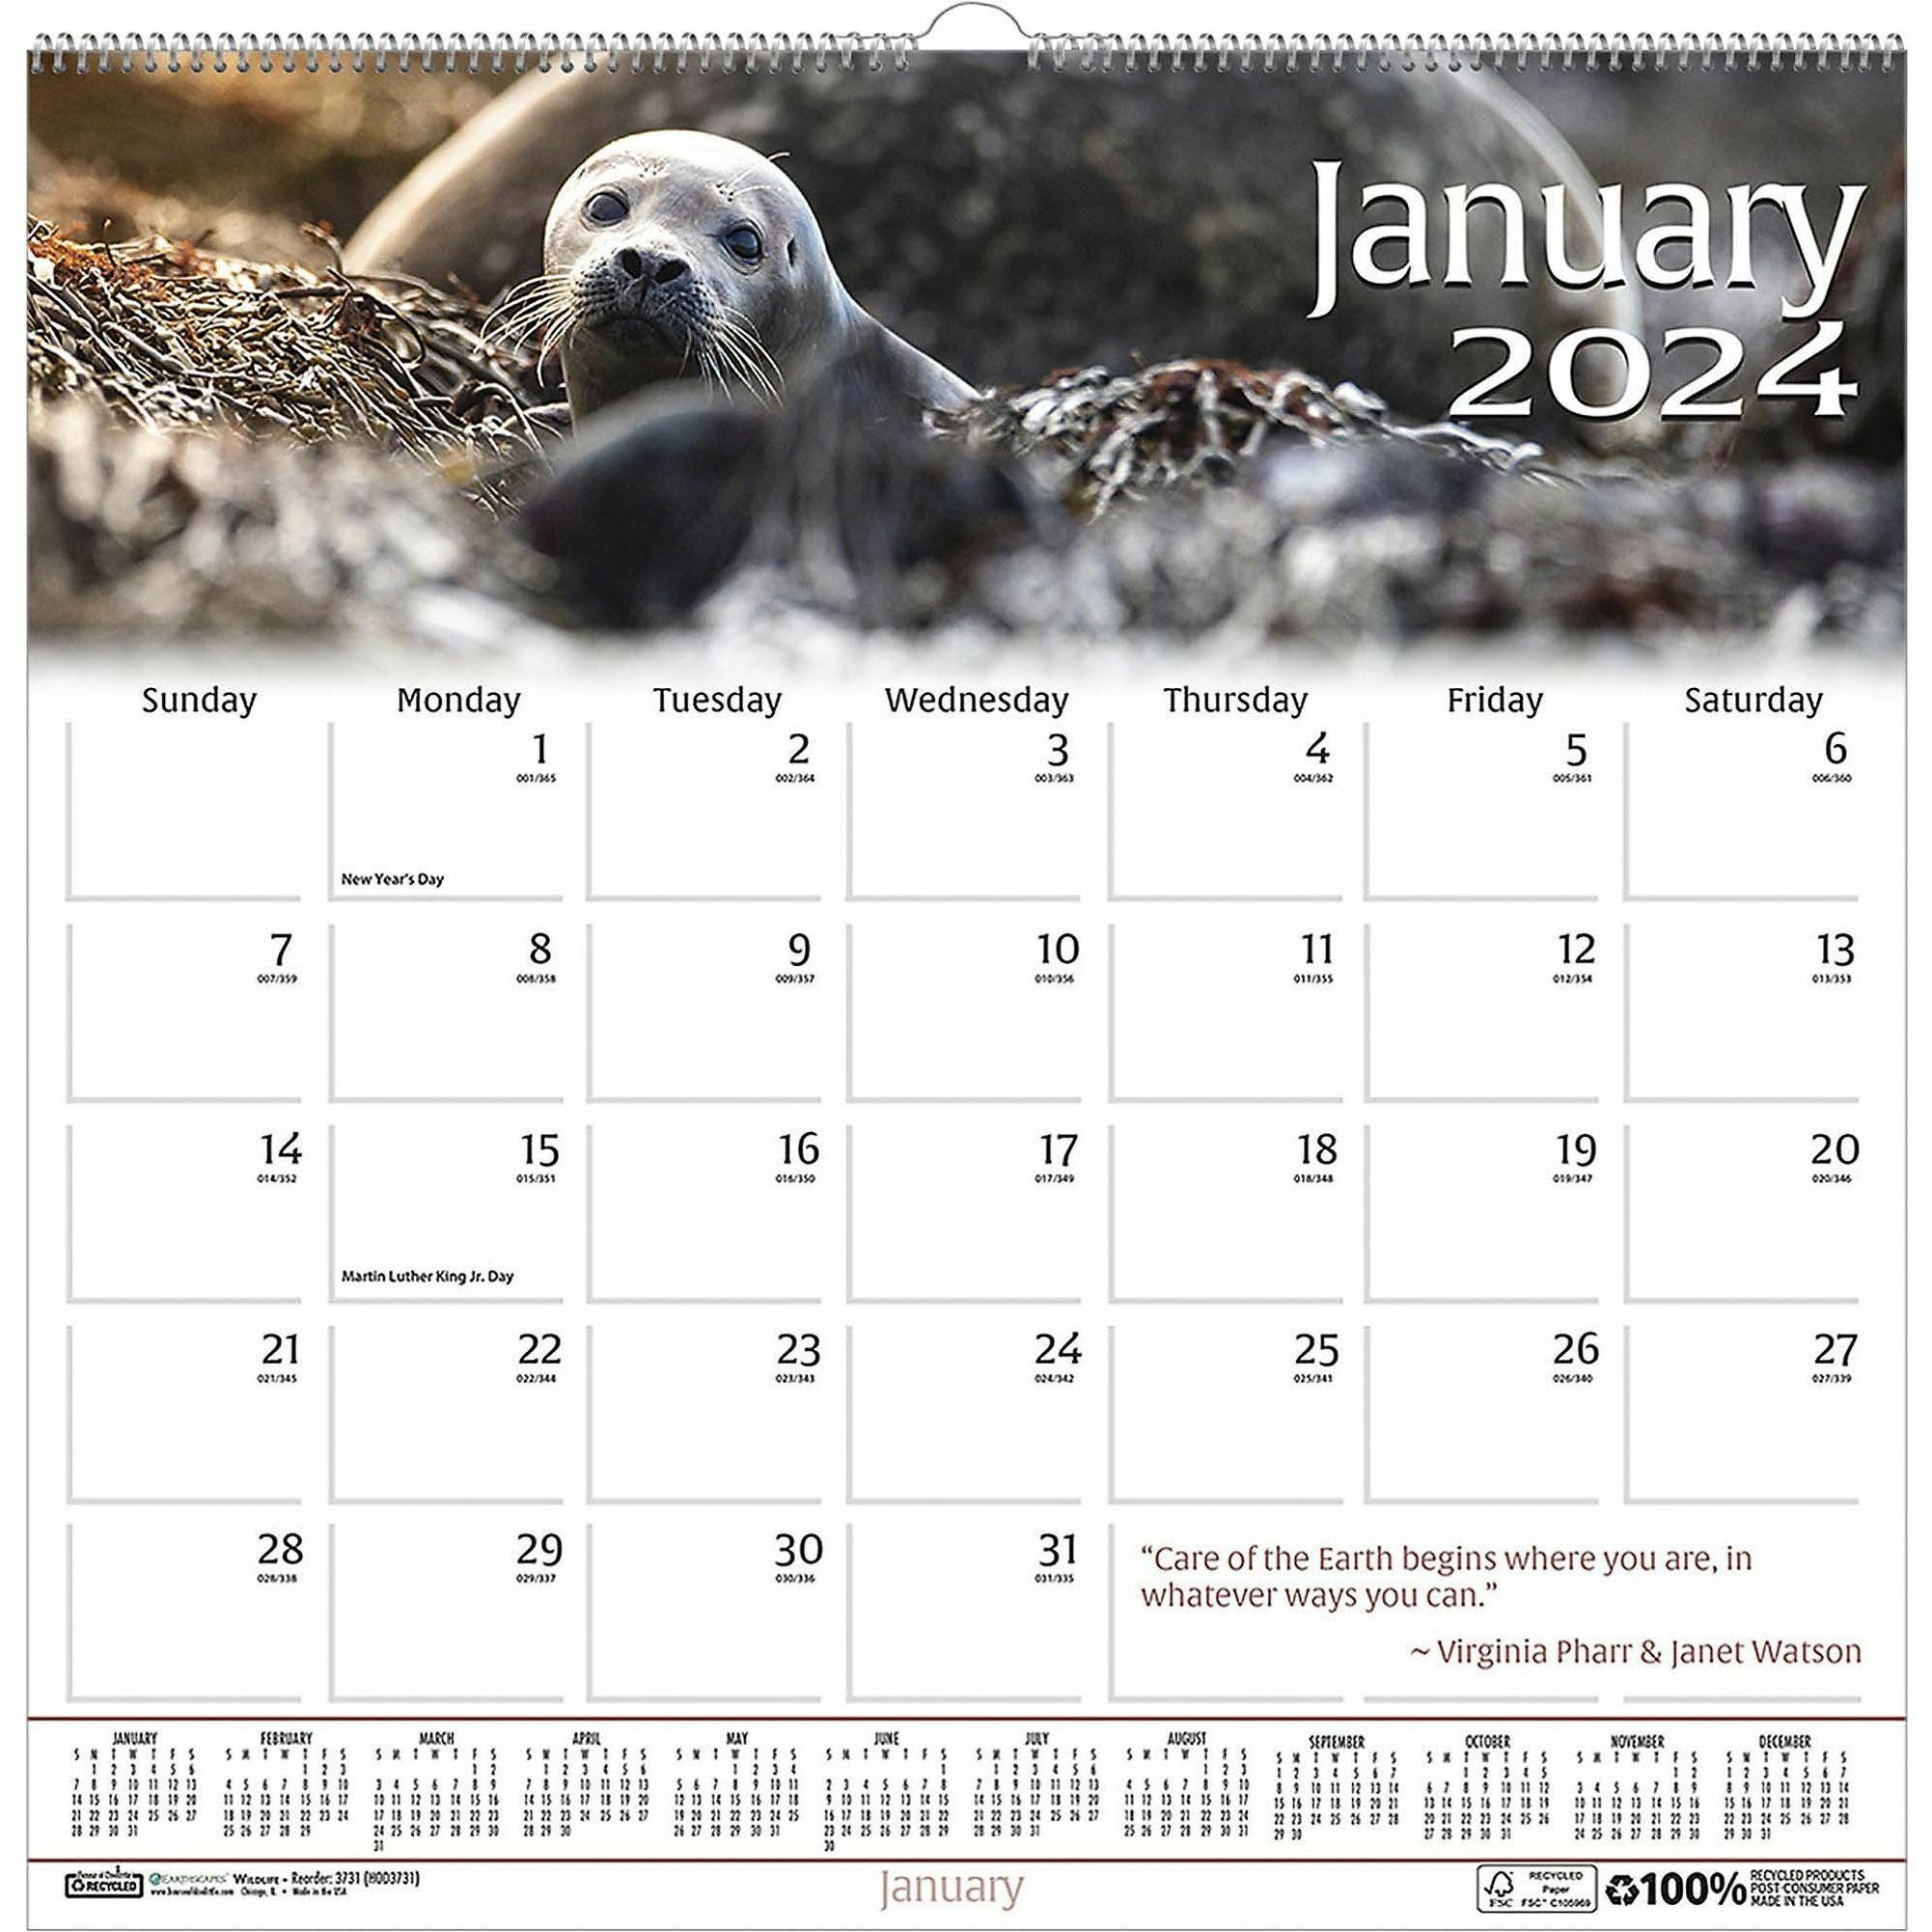 house-of-doolittle-earthscapes-wildlife-wall-calendars-calendars-refills-house-of-doolittle